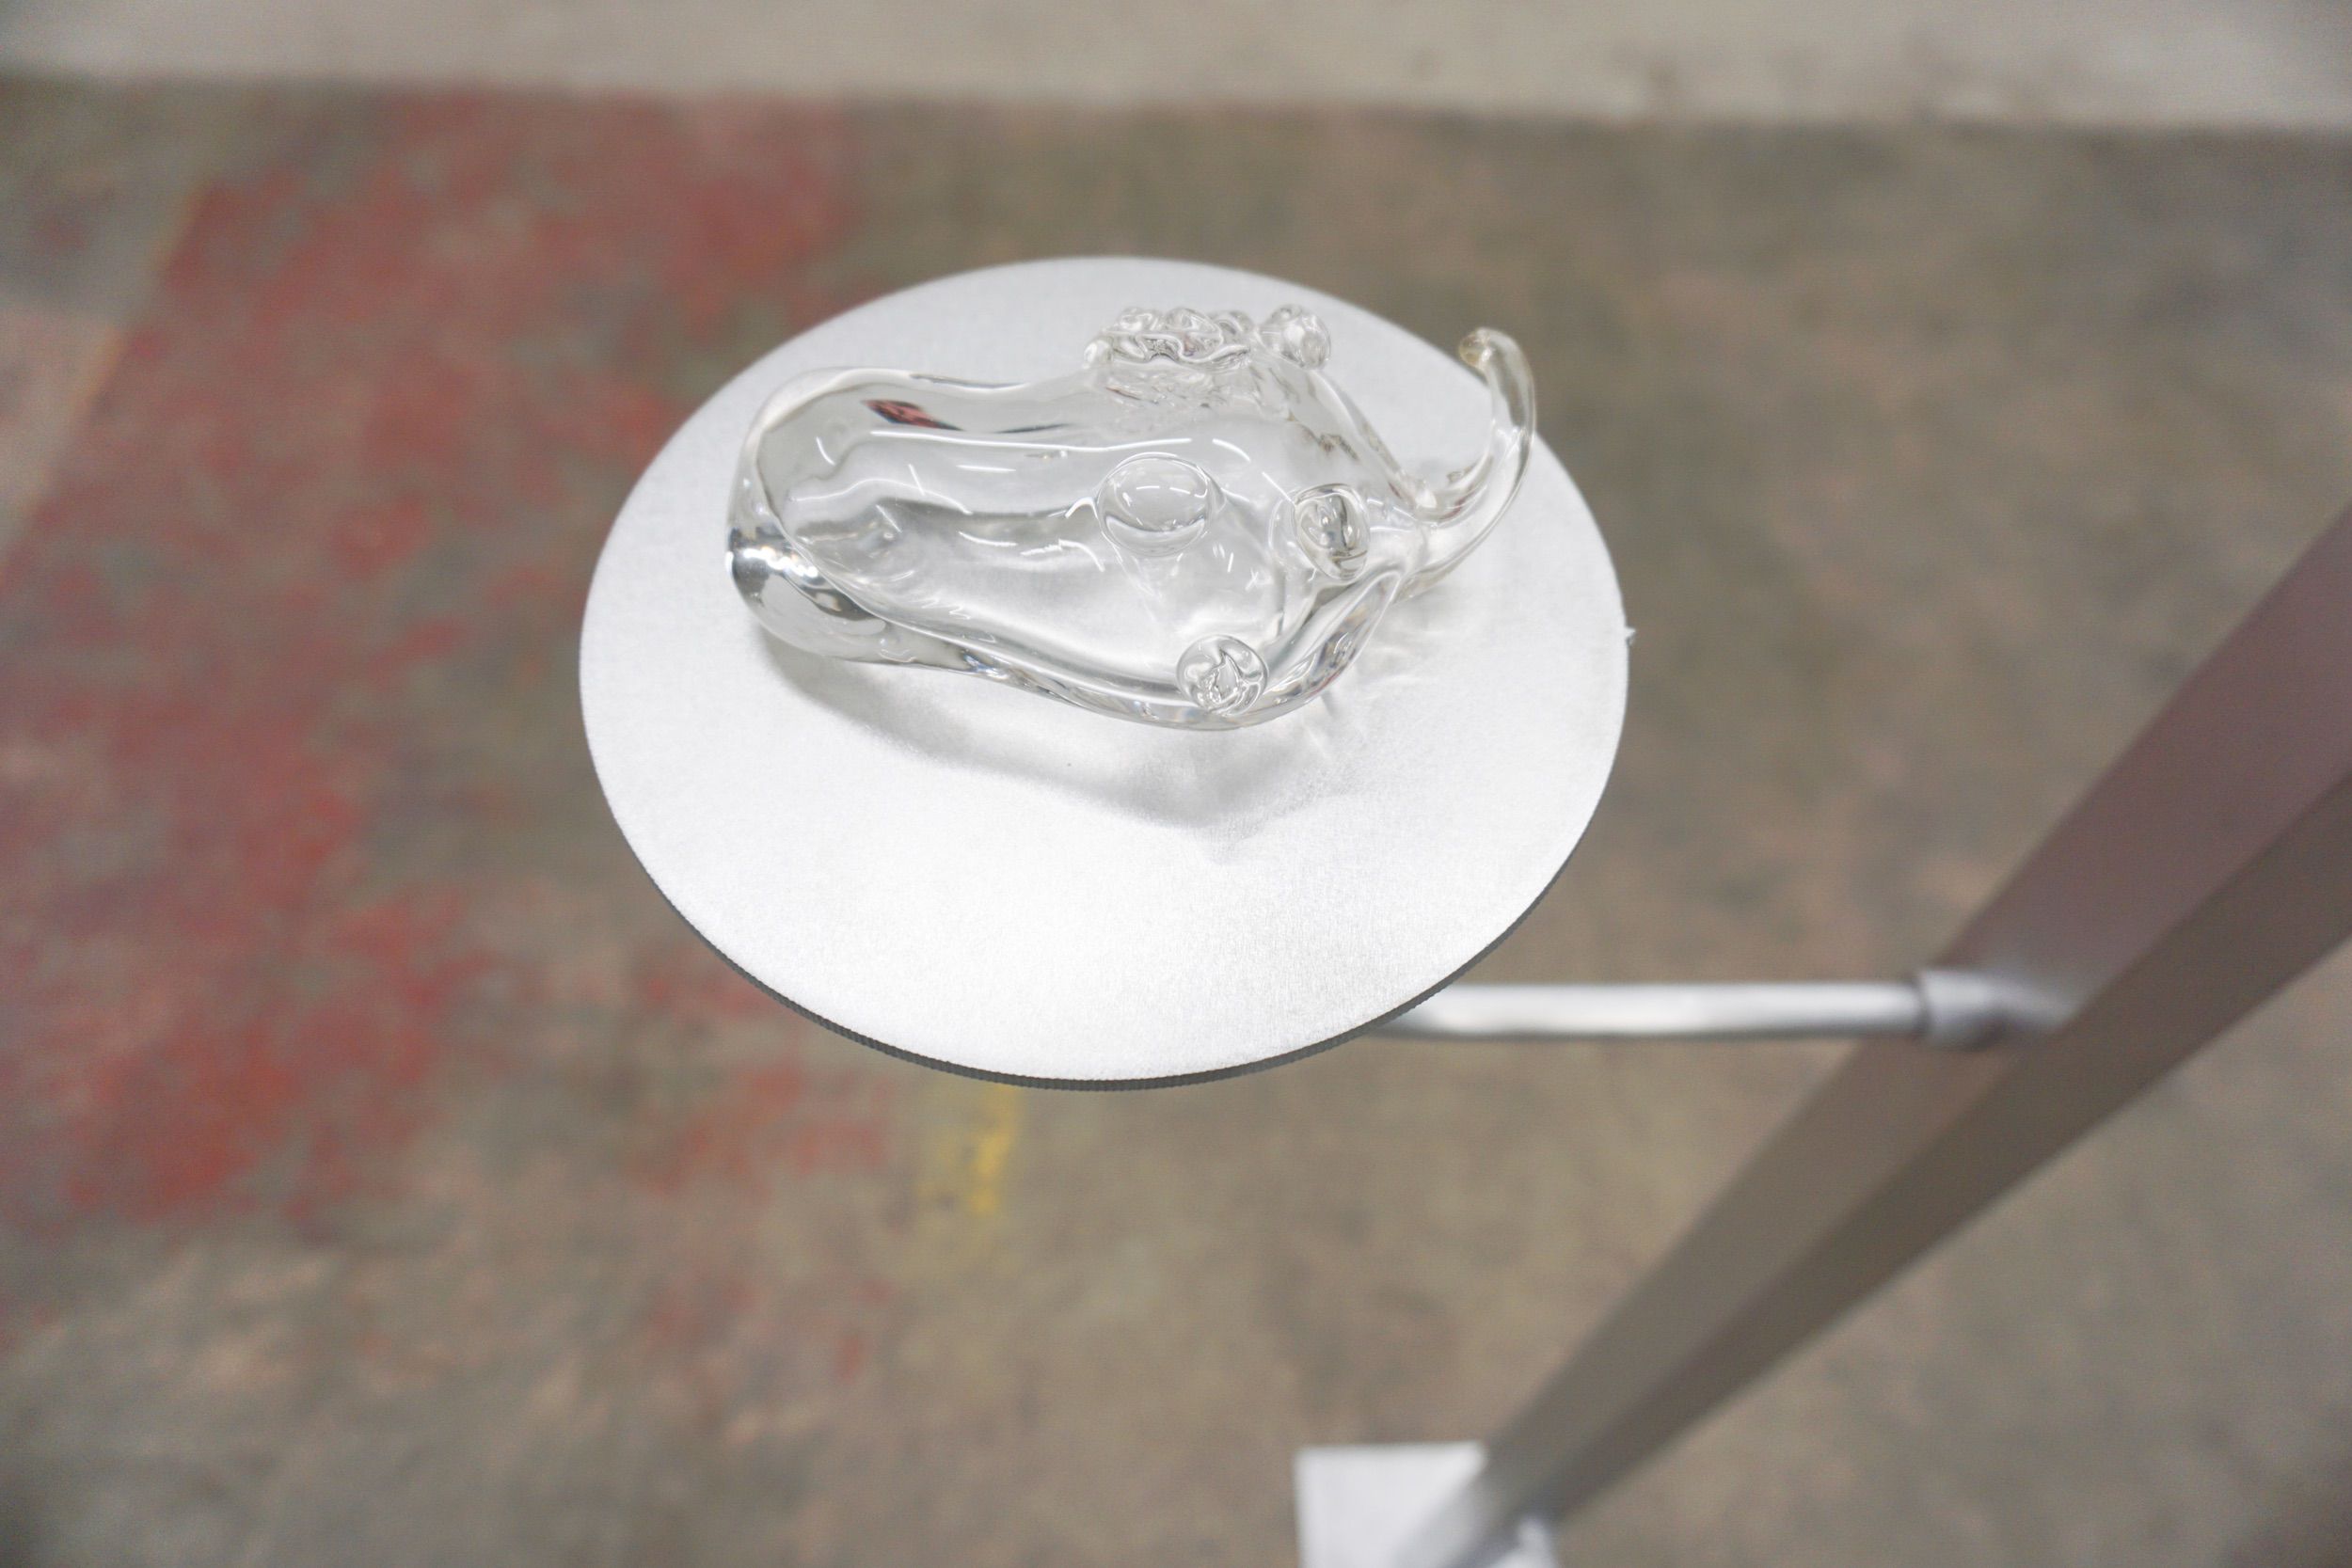  Alex Ito  Ghost Rack 1 , 2016 (detail) Aluminum, glass, taxidermy  98 x 24 inches 